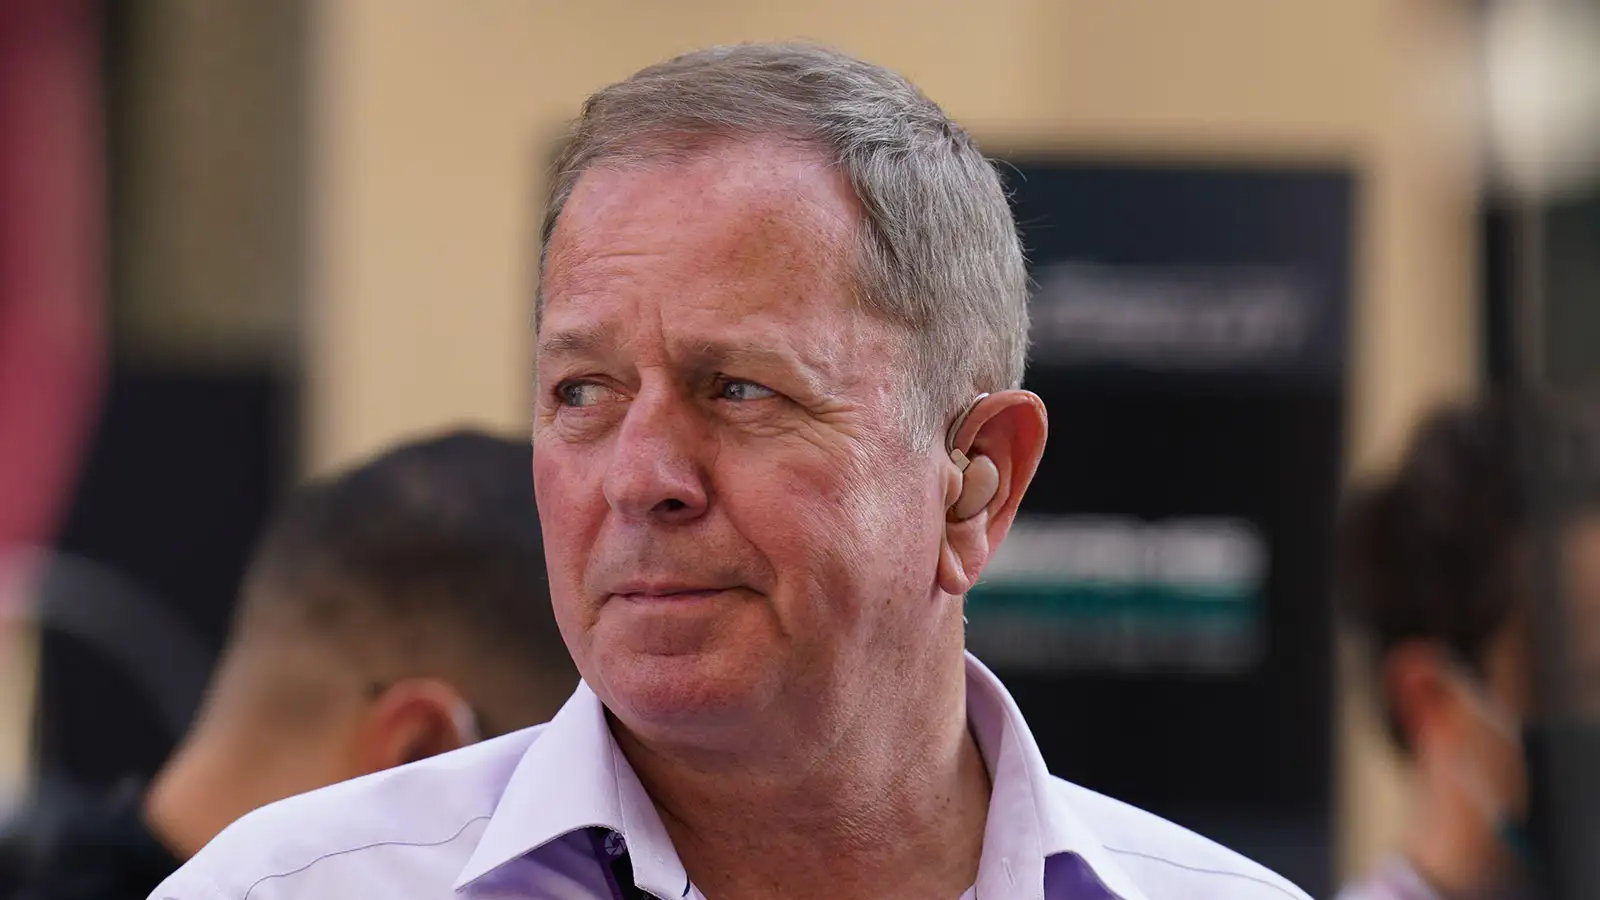 Martin Brundle taking part in Sky Sports F1's coverage. Abu Dhabi 2021